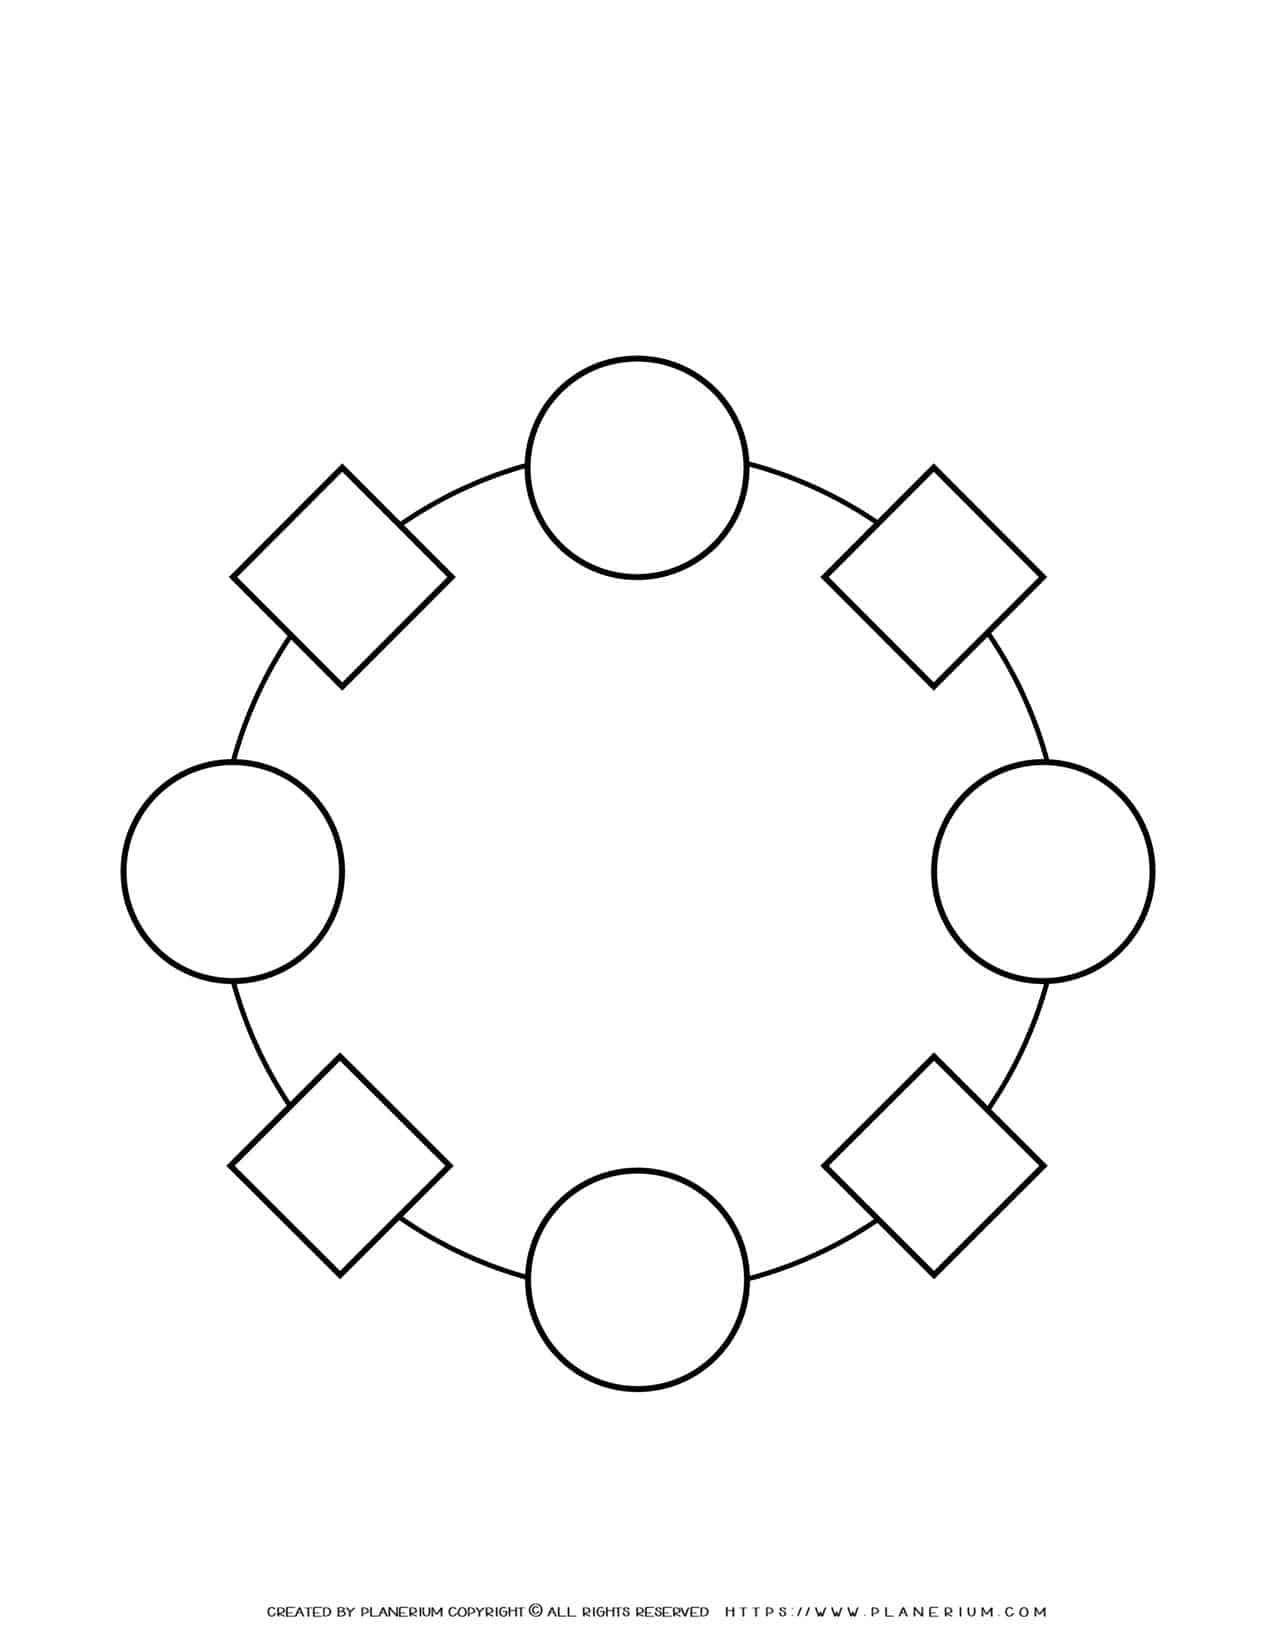 Sequence Chart Template - Four Squares and Four Circles on a Circle | Planerium